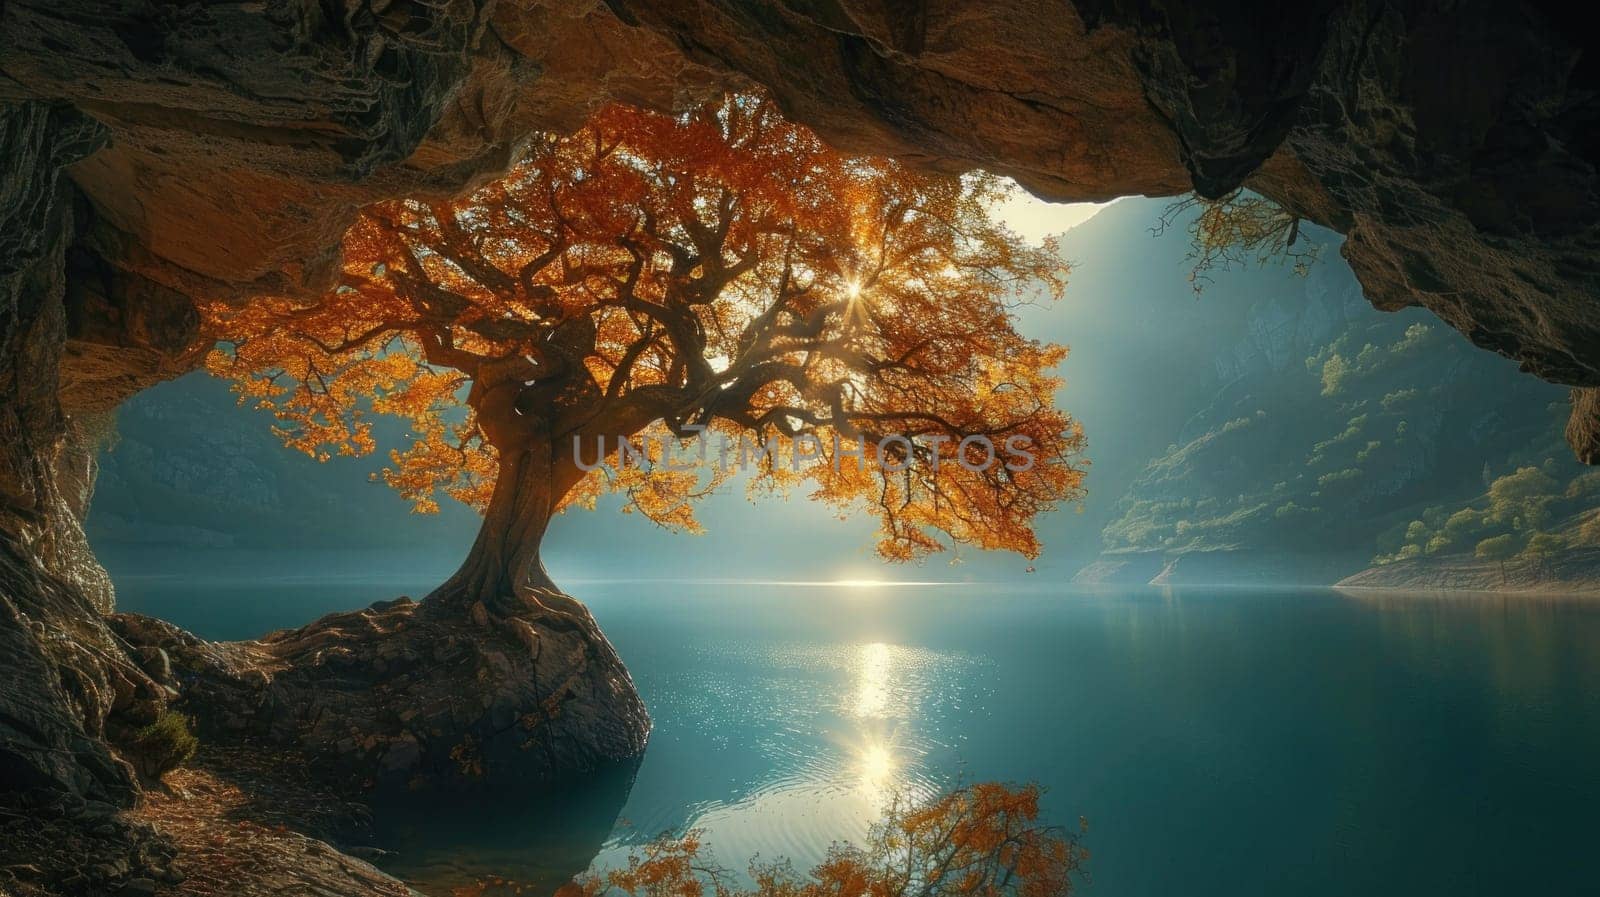 A tree is in a cave with a body of water in the background by golfmerrymaker